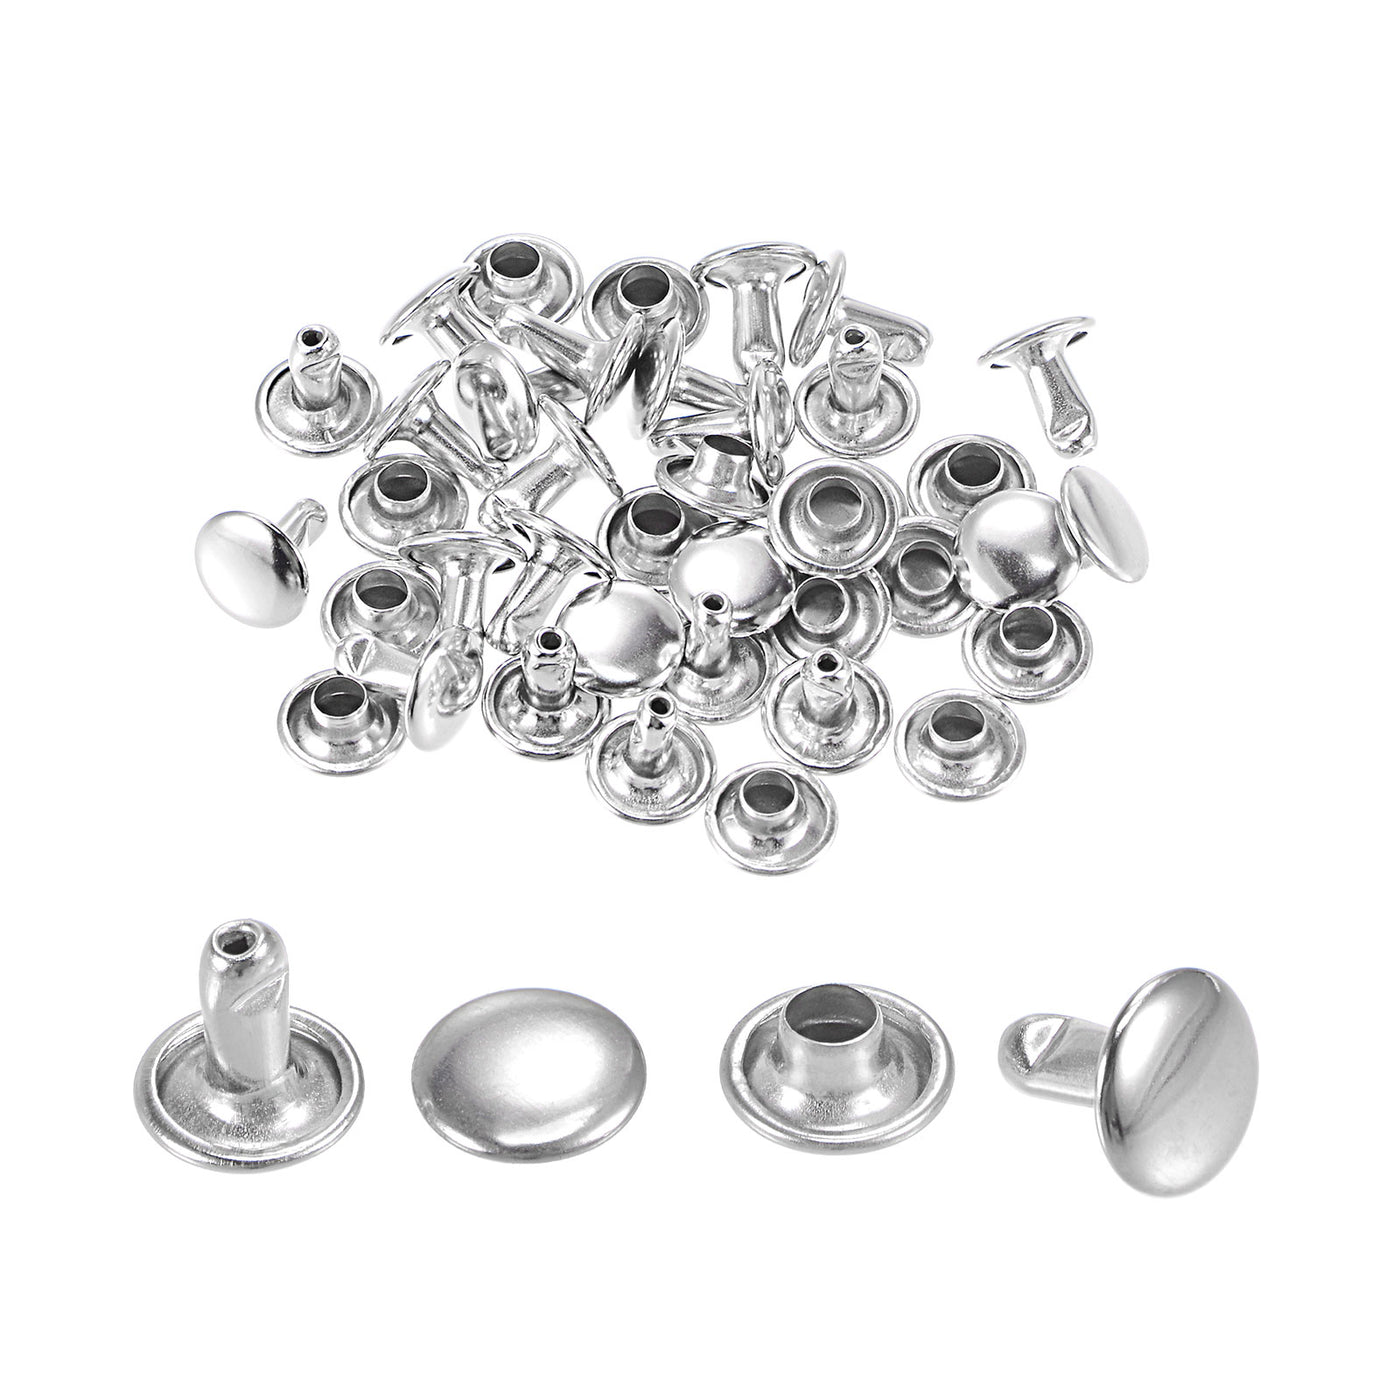 uxcell Uxcell 20 Sets Leather Rivets Silver Tone 8mm Double Cap Brass Rivet Leather Studs